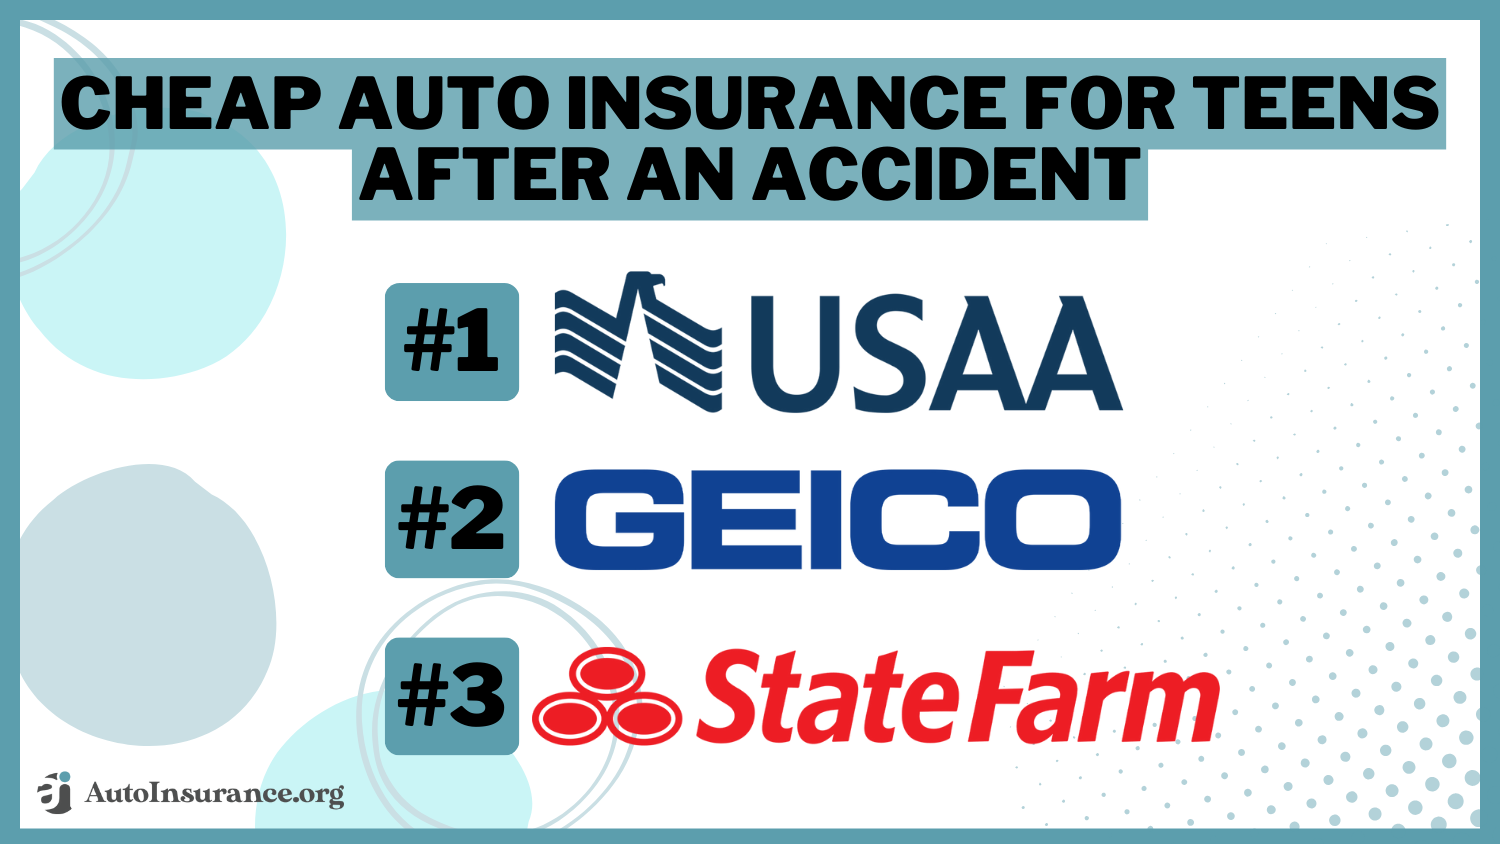 Cheap Auto Insurance For Teens After An Accident: USAA, Geico, State farm